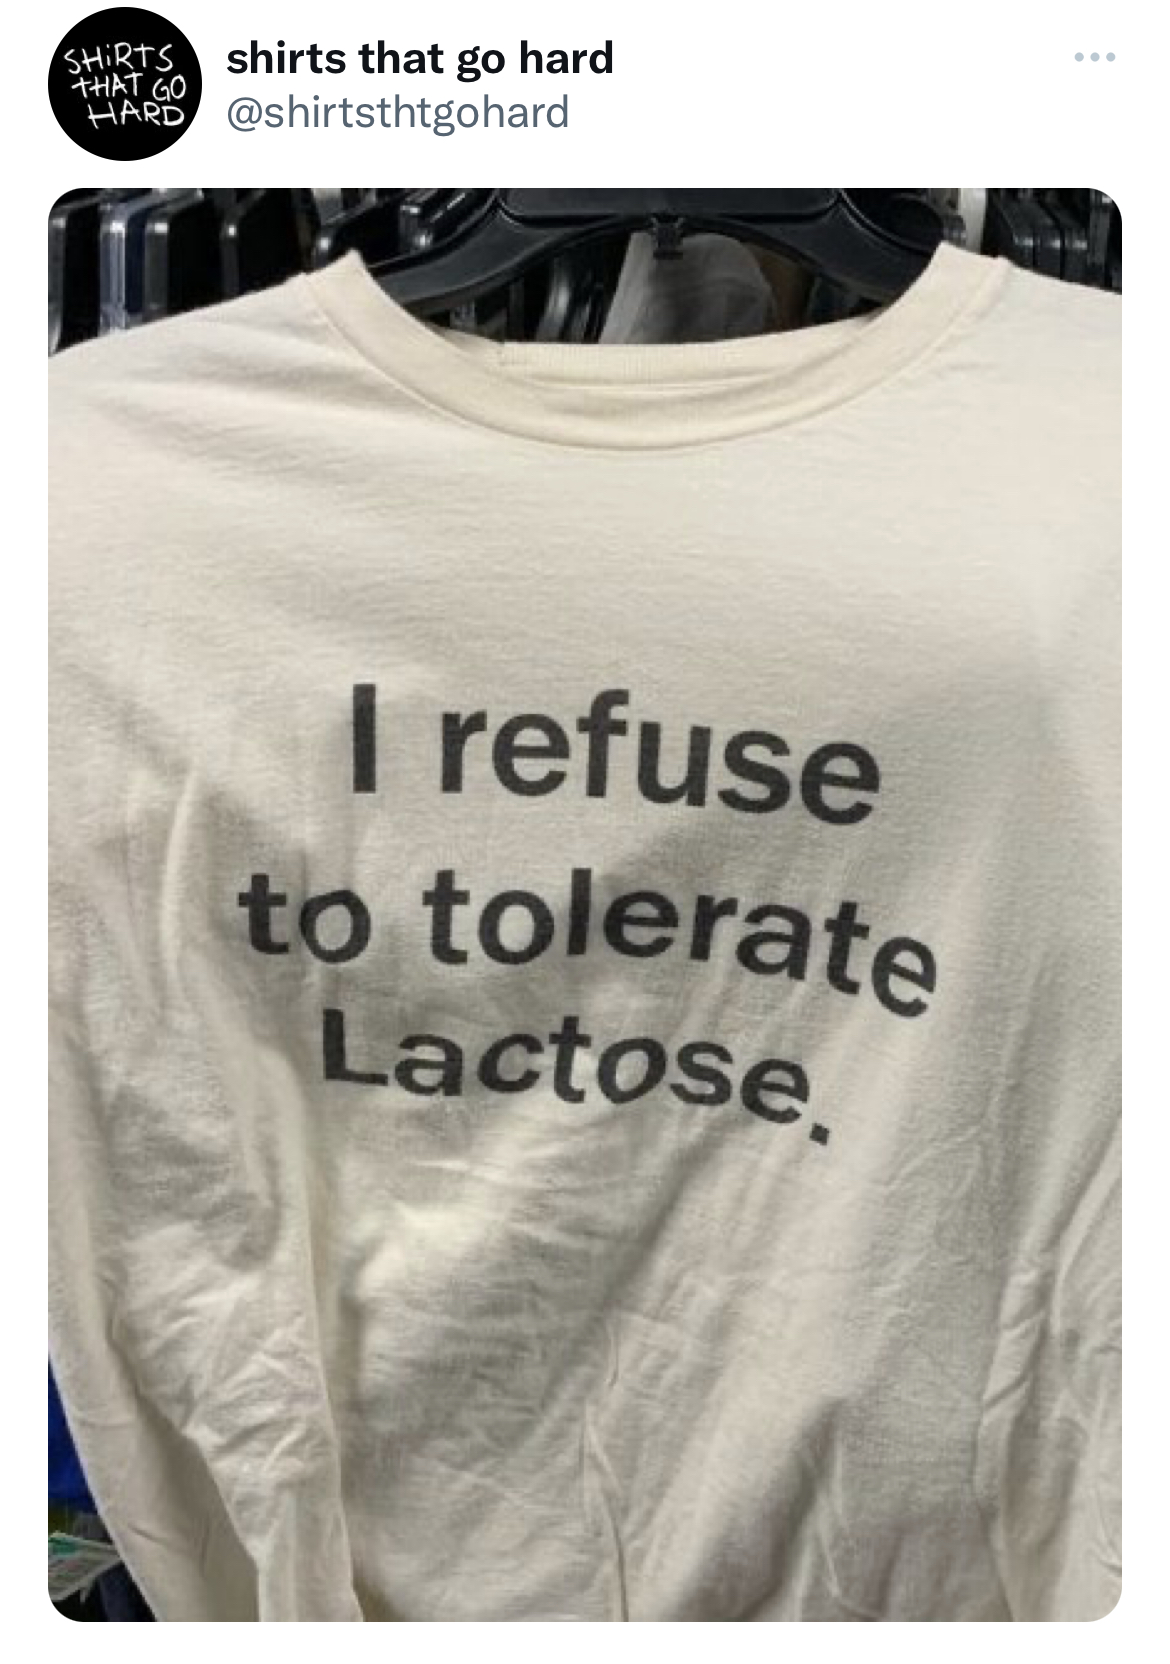 funny and fresh tweets - refugee action - Shirts shirts that go hard Hard That Go I refuse to tolerate Lactose,